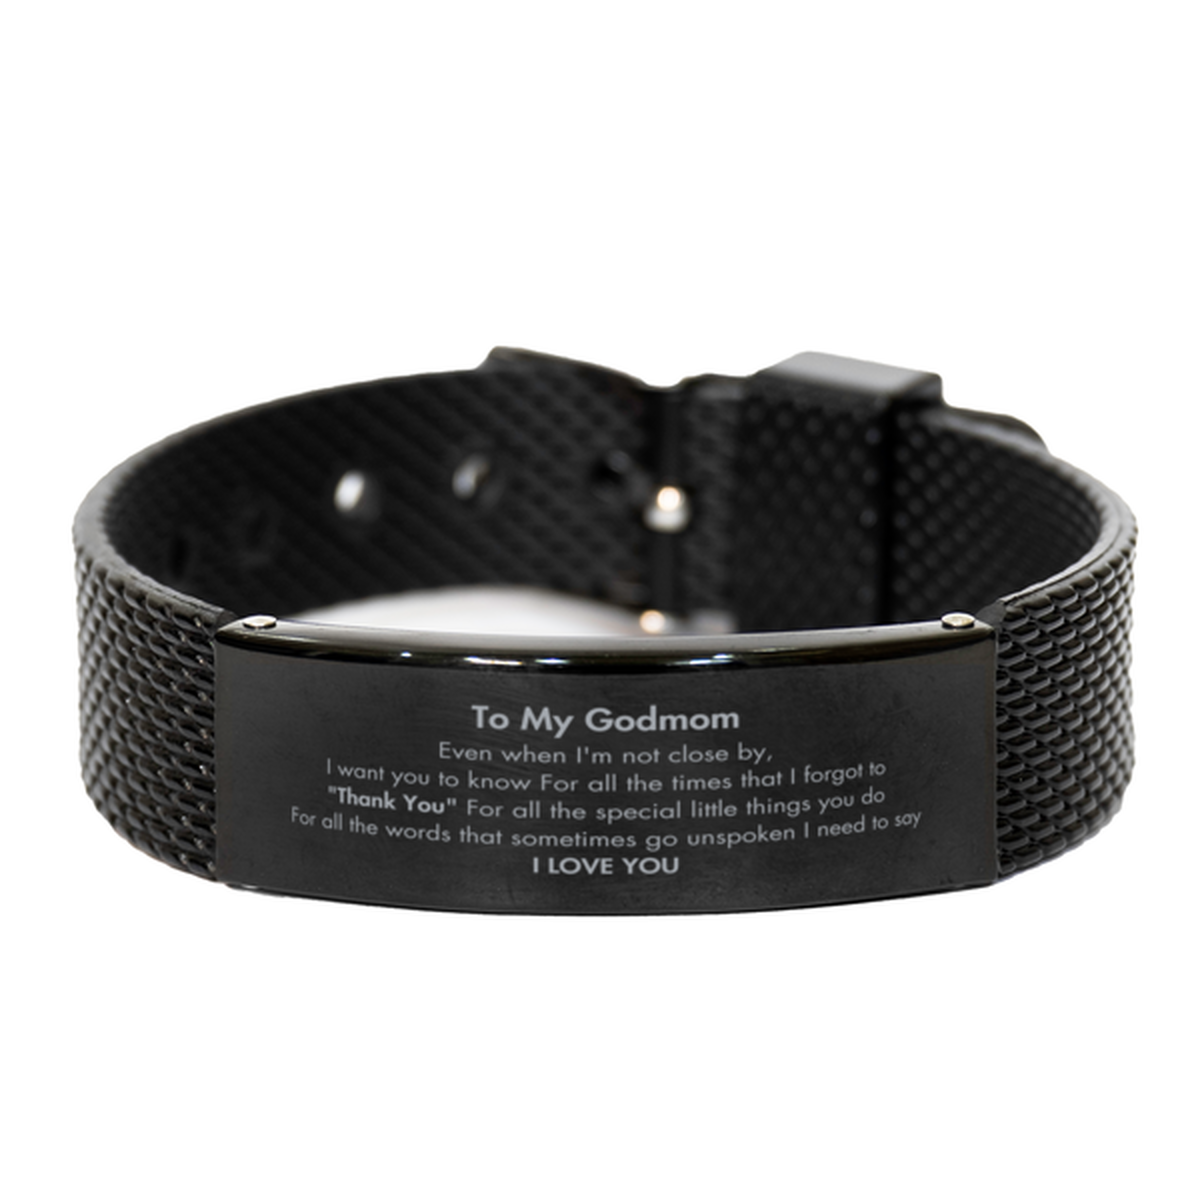 Thank You Gifts for Godmom, Keepsake Black Shark Mesh Bracelet Gifts for Godmom Birthday Mother's day Father's Day Godmom For all the words That sometimes go unspoken I need to say I LOVE YOU